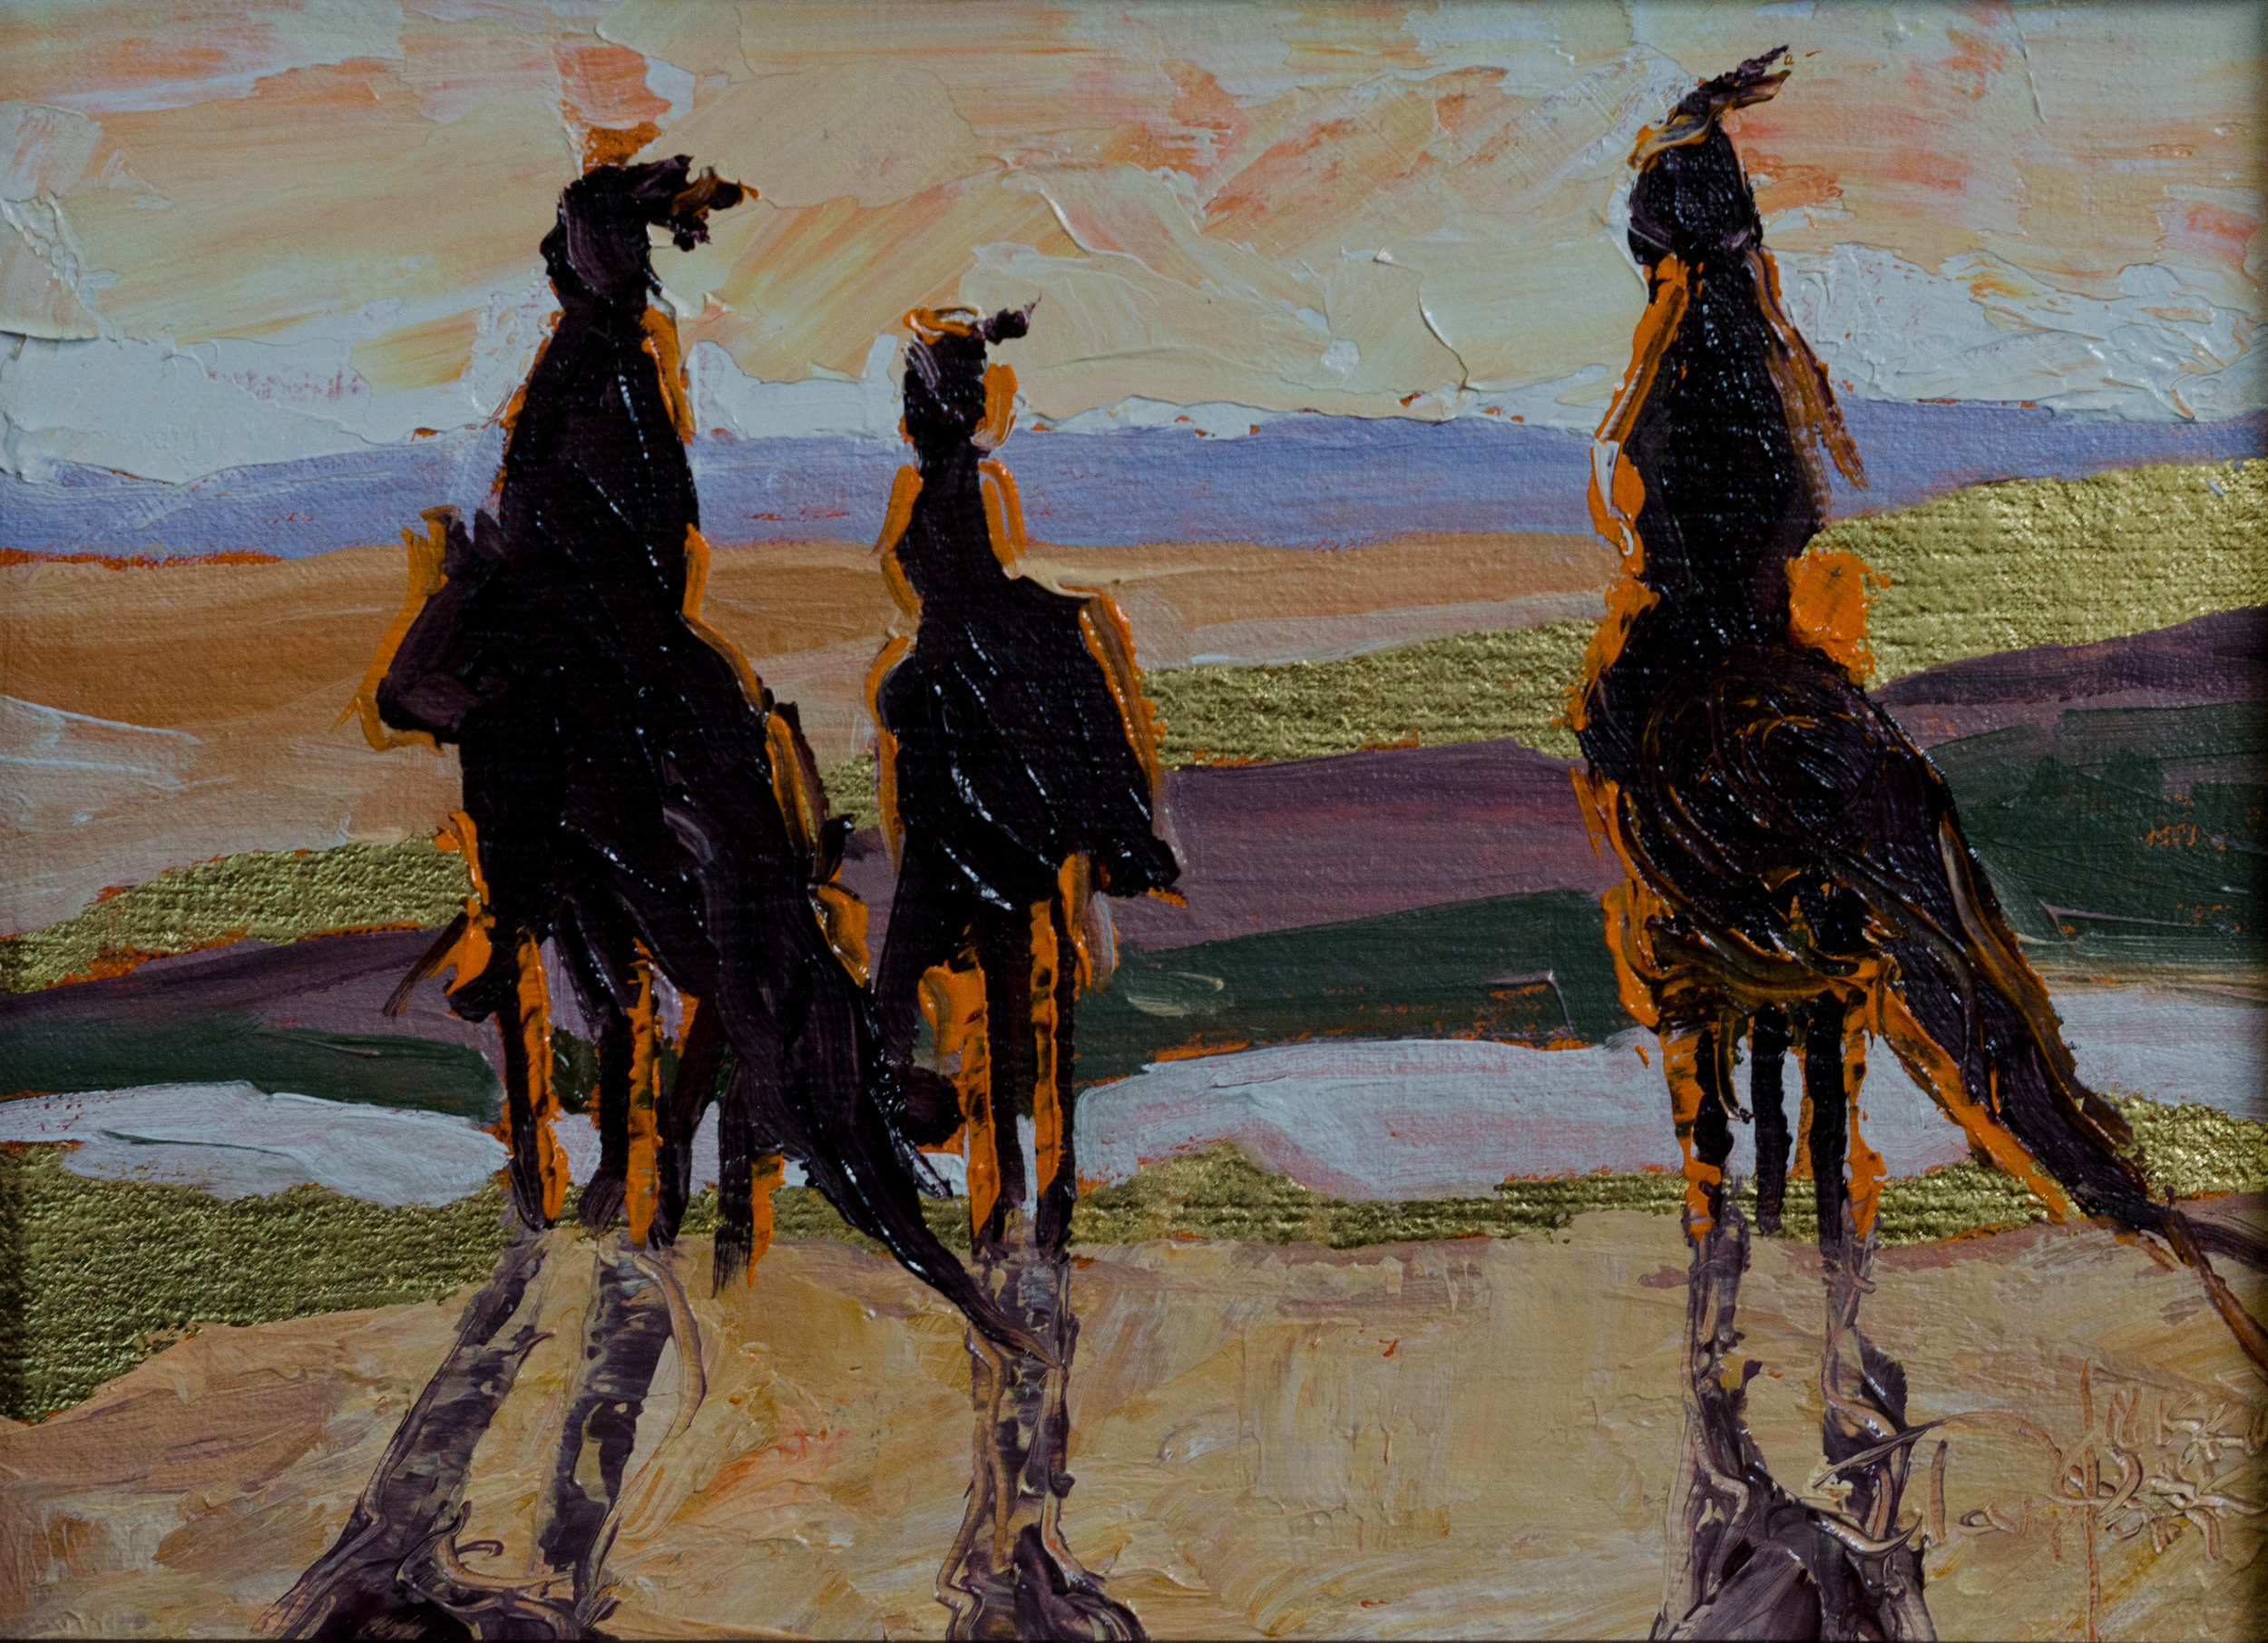 "How Many Do You Think Are Coming?" Oil and 22k gold on linen. ©2015 Janice Tanton. 6"x8"